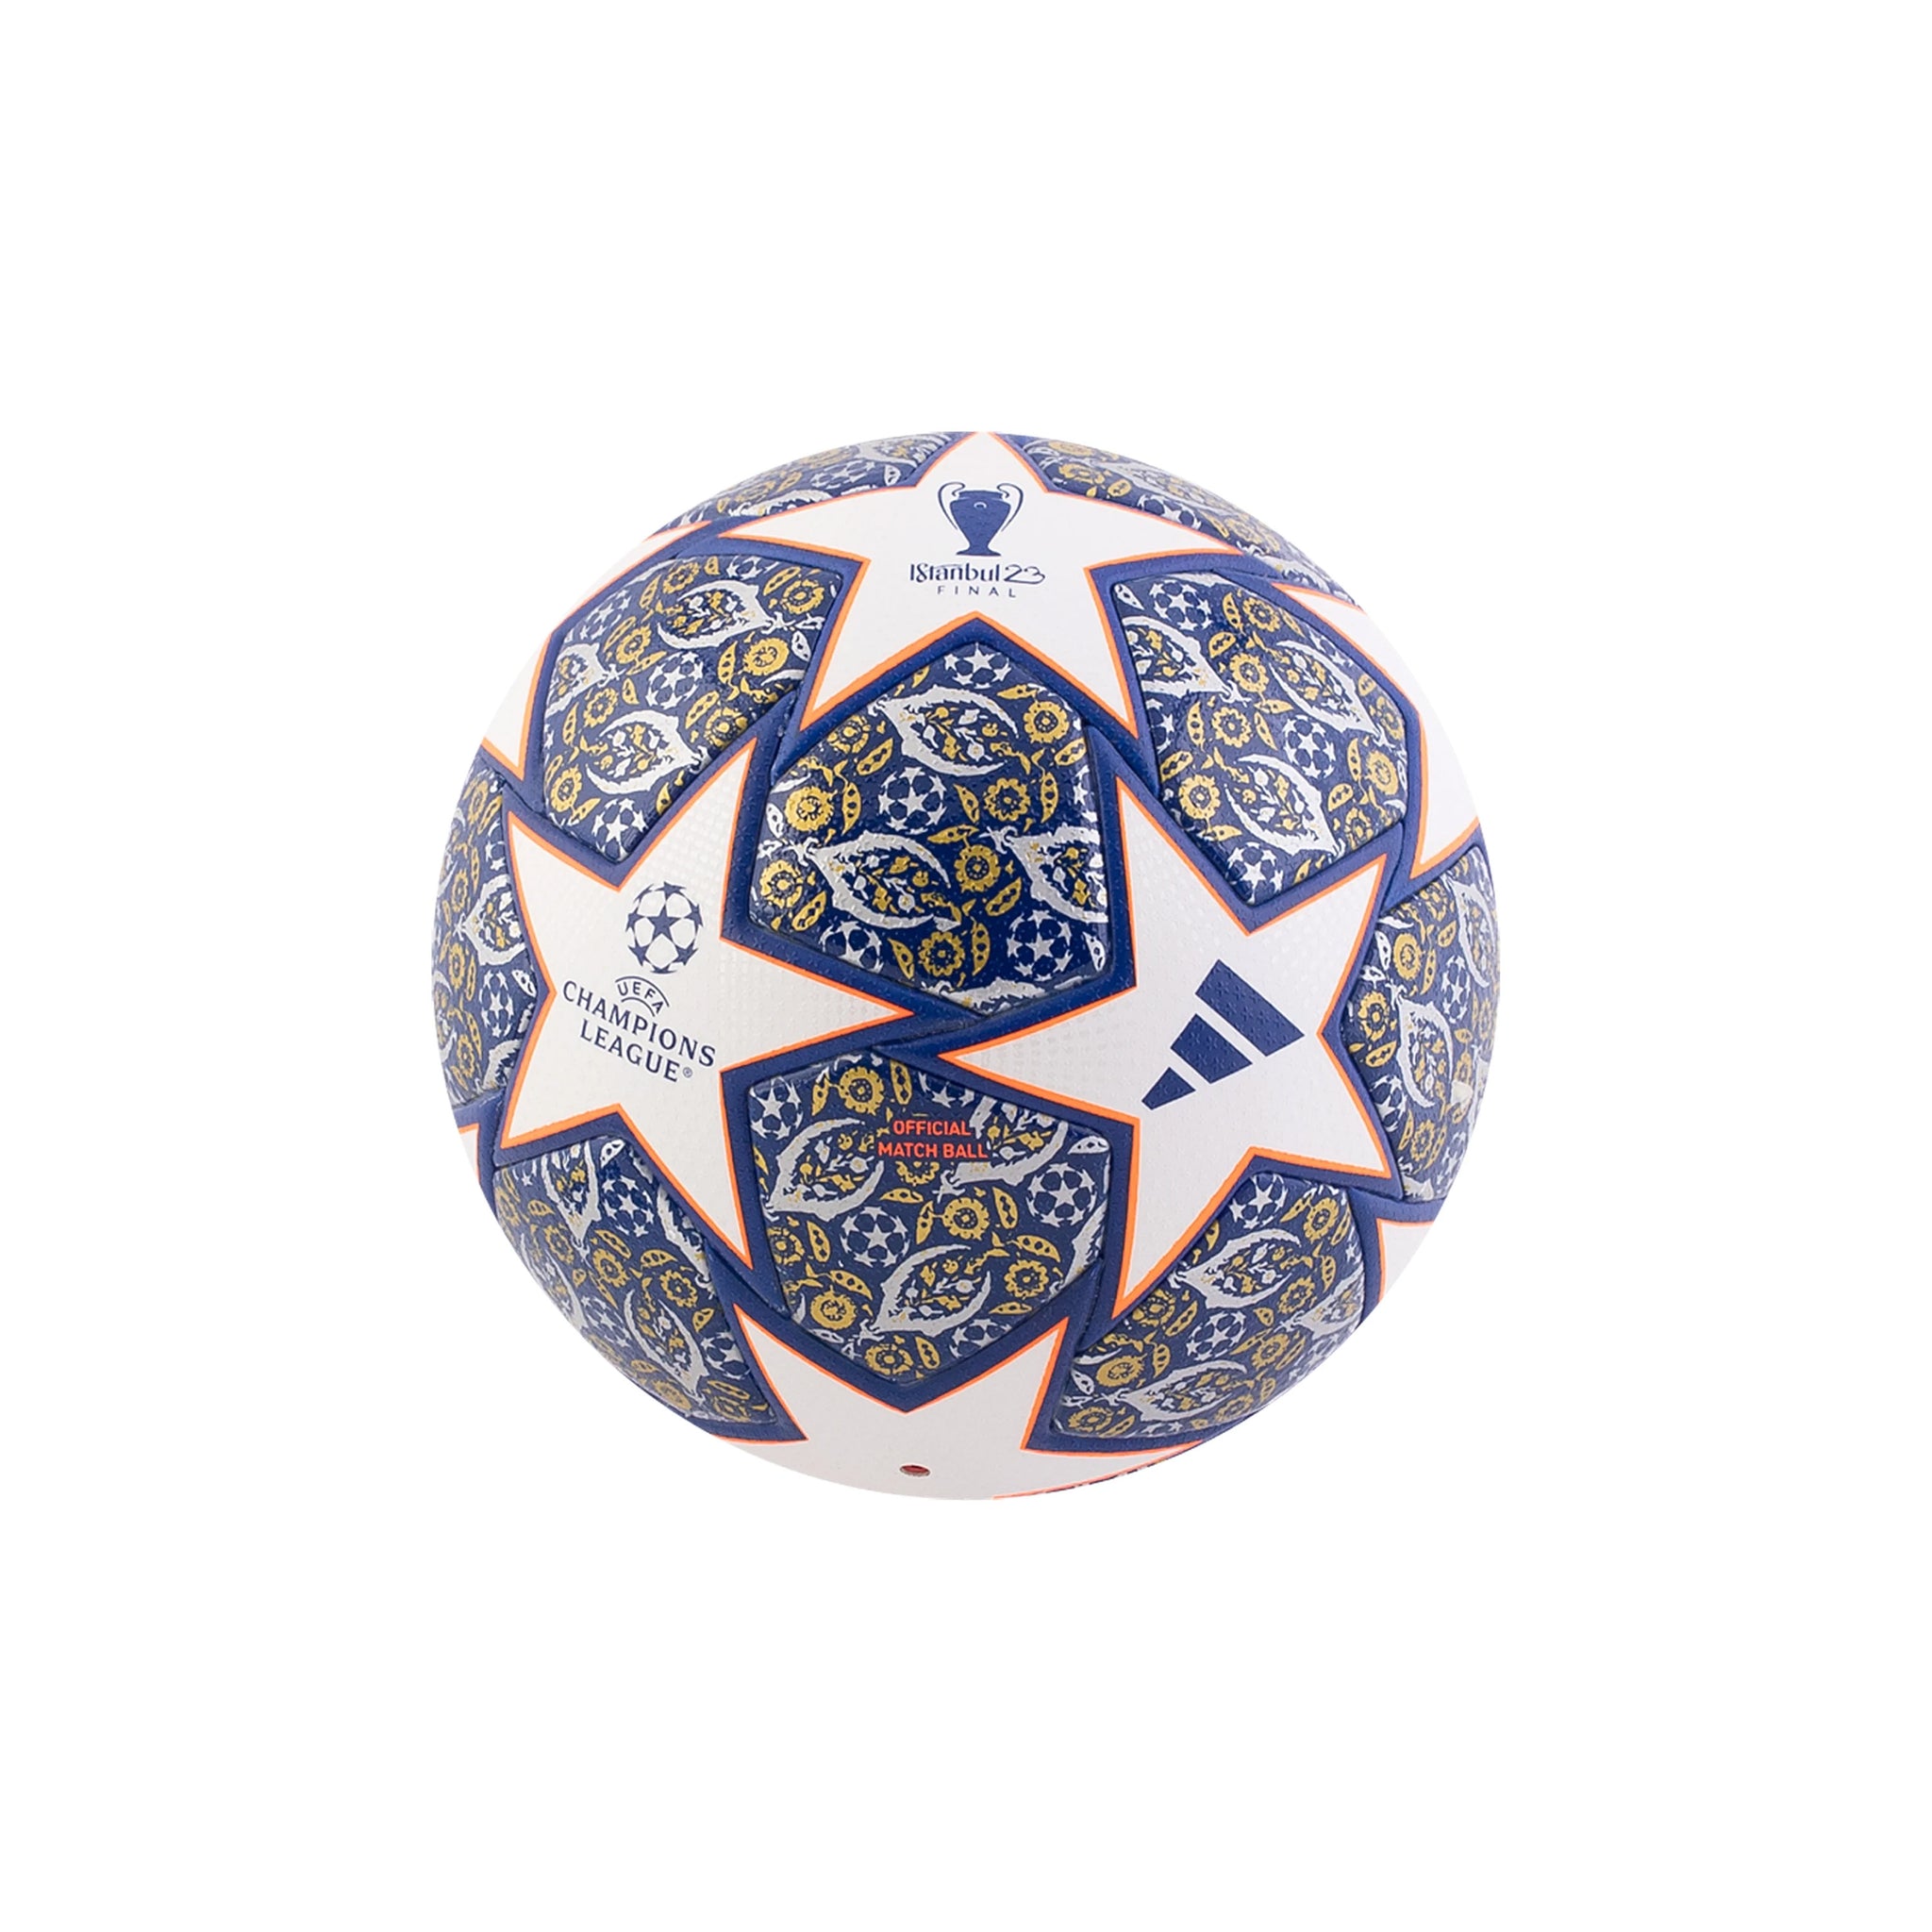 ADIDAS UCL Istanbul 23 Official Match Ball